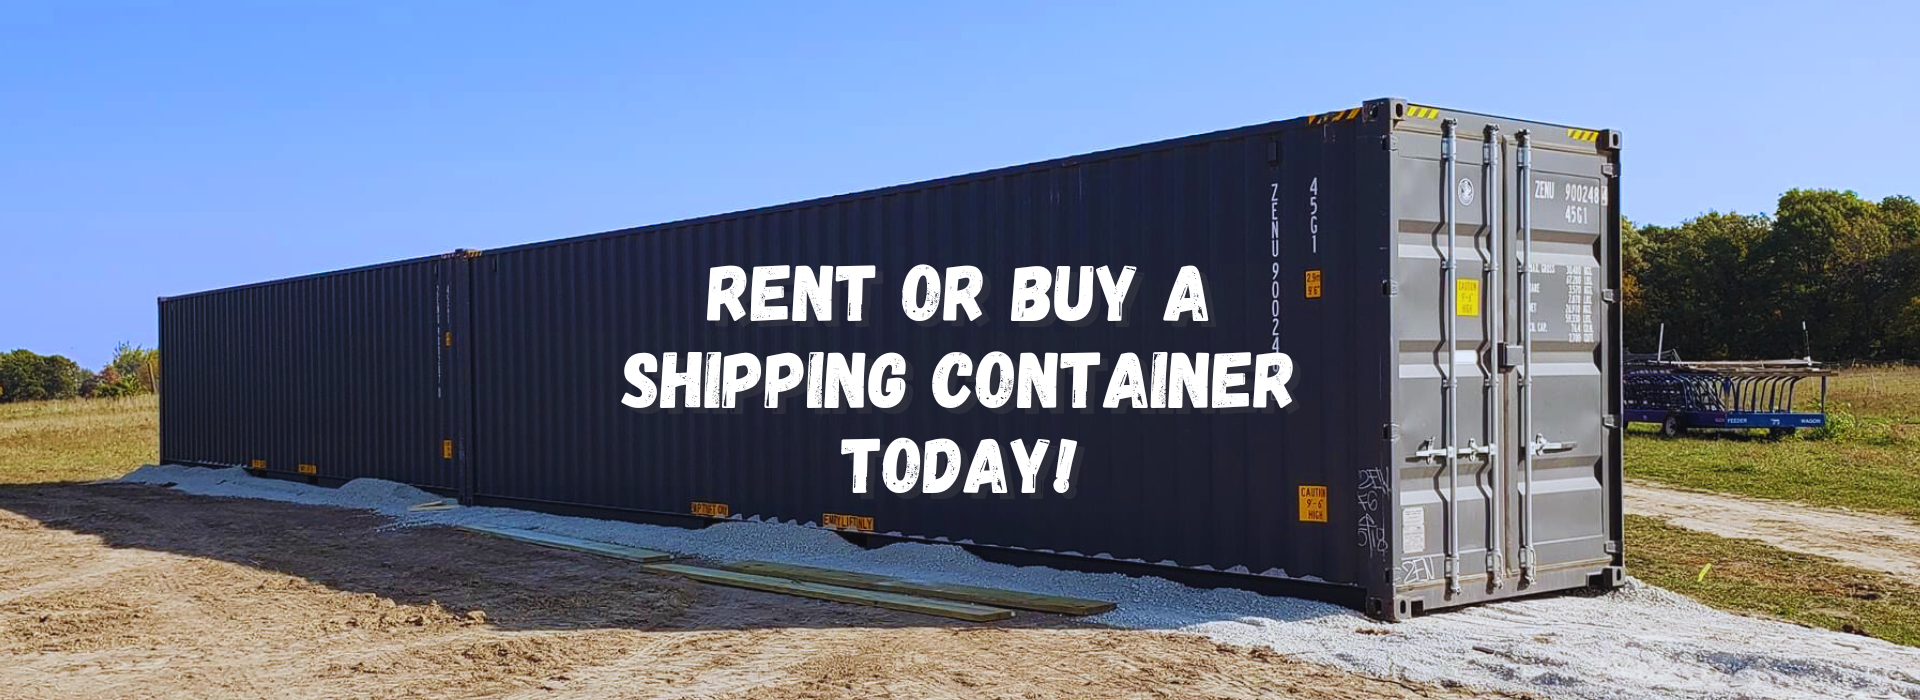 Giant Containers  Custom Shipping Container Fabrication